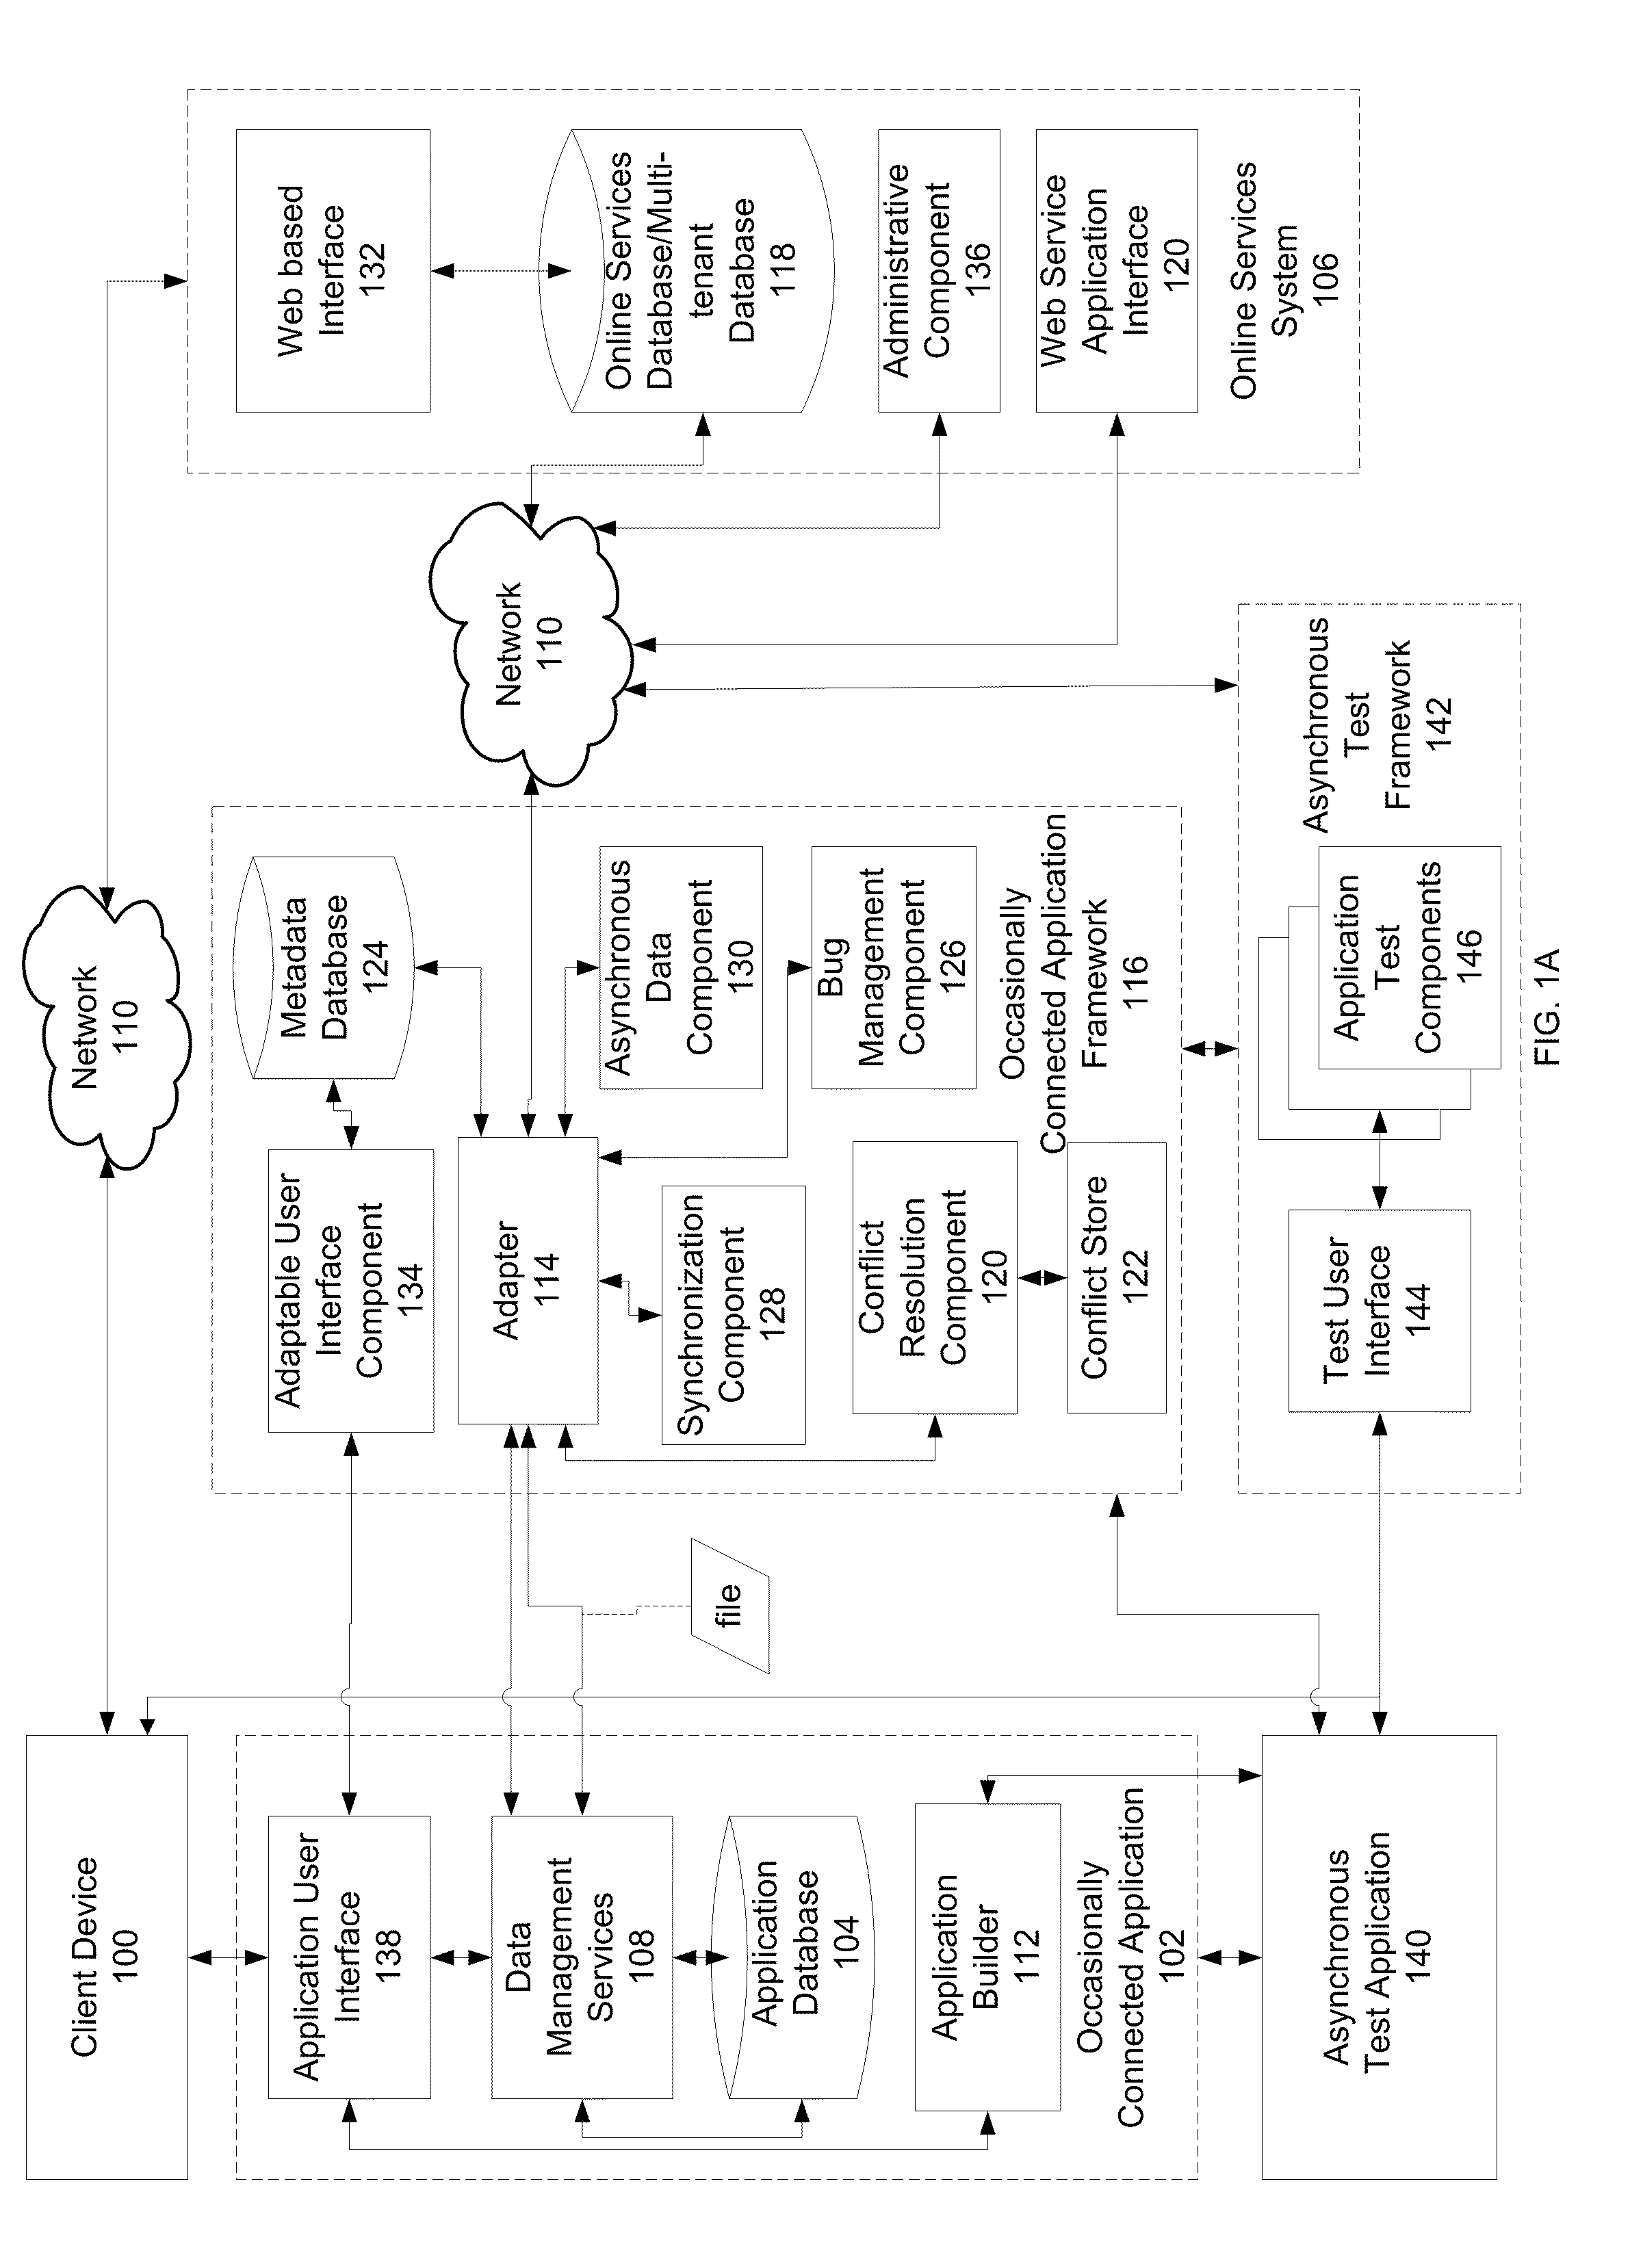 Performing asynchronous testing of an application occasionally connected to an online services system